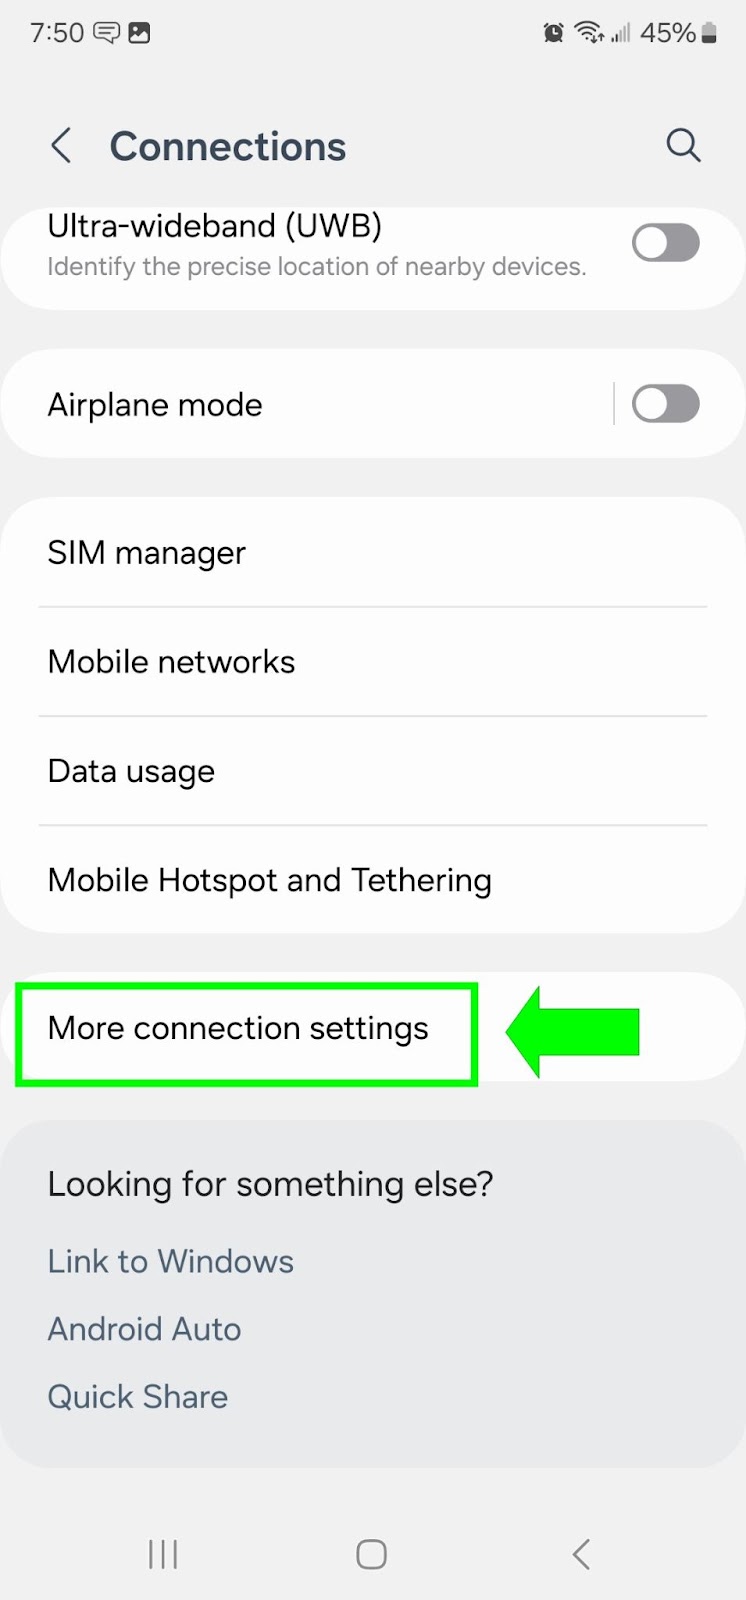 A screenshot of Android Connections settings with More connection settings highlighted.